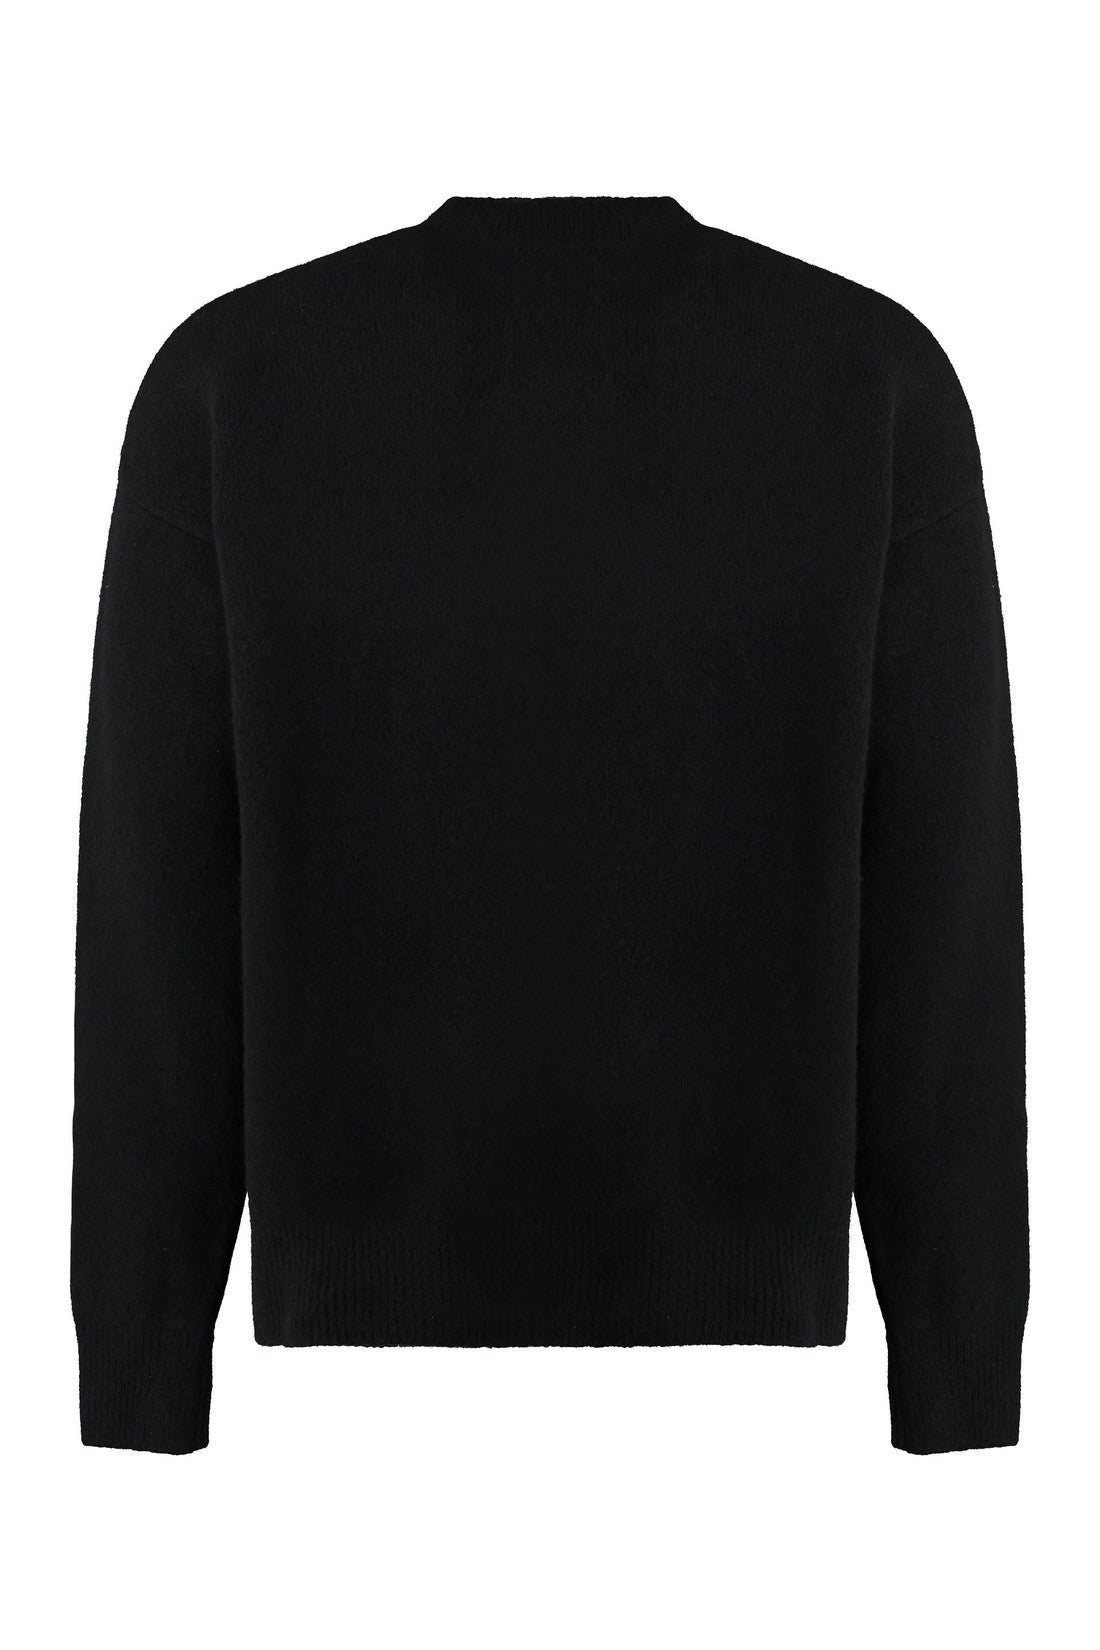 Palm Angels-OUTLET-SALE-Merino wool blend sweater-ARCHIVIST